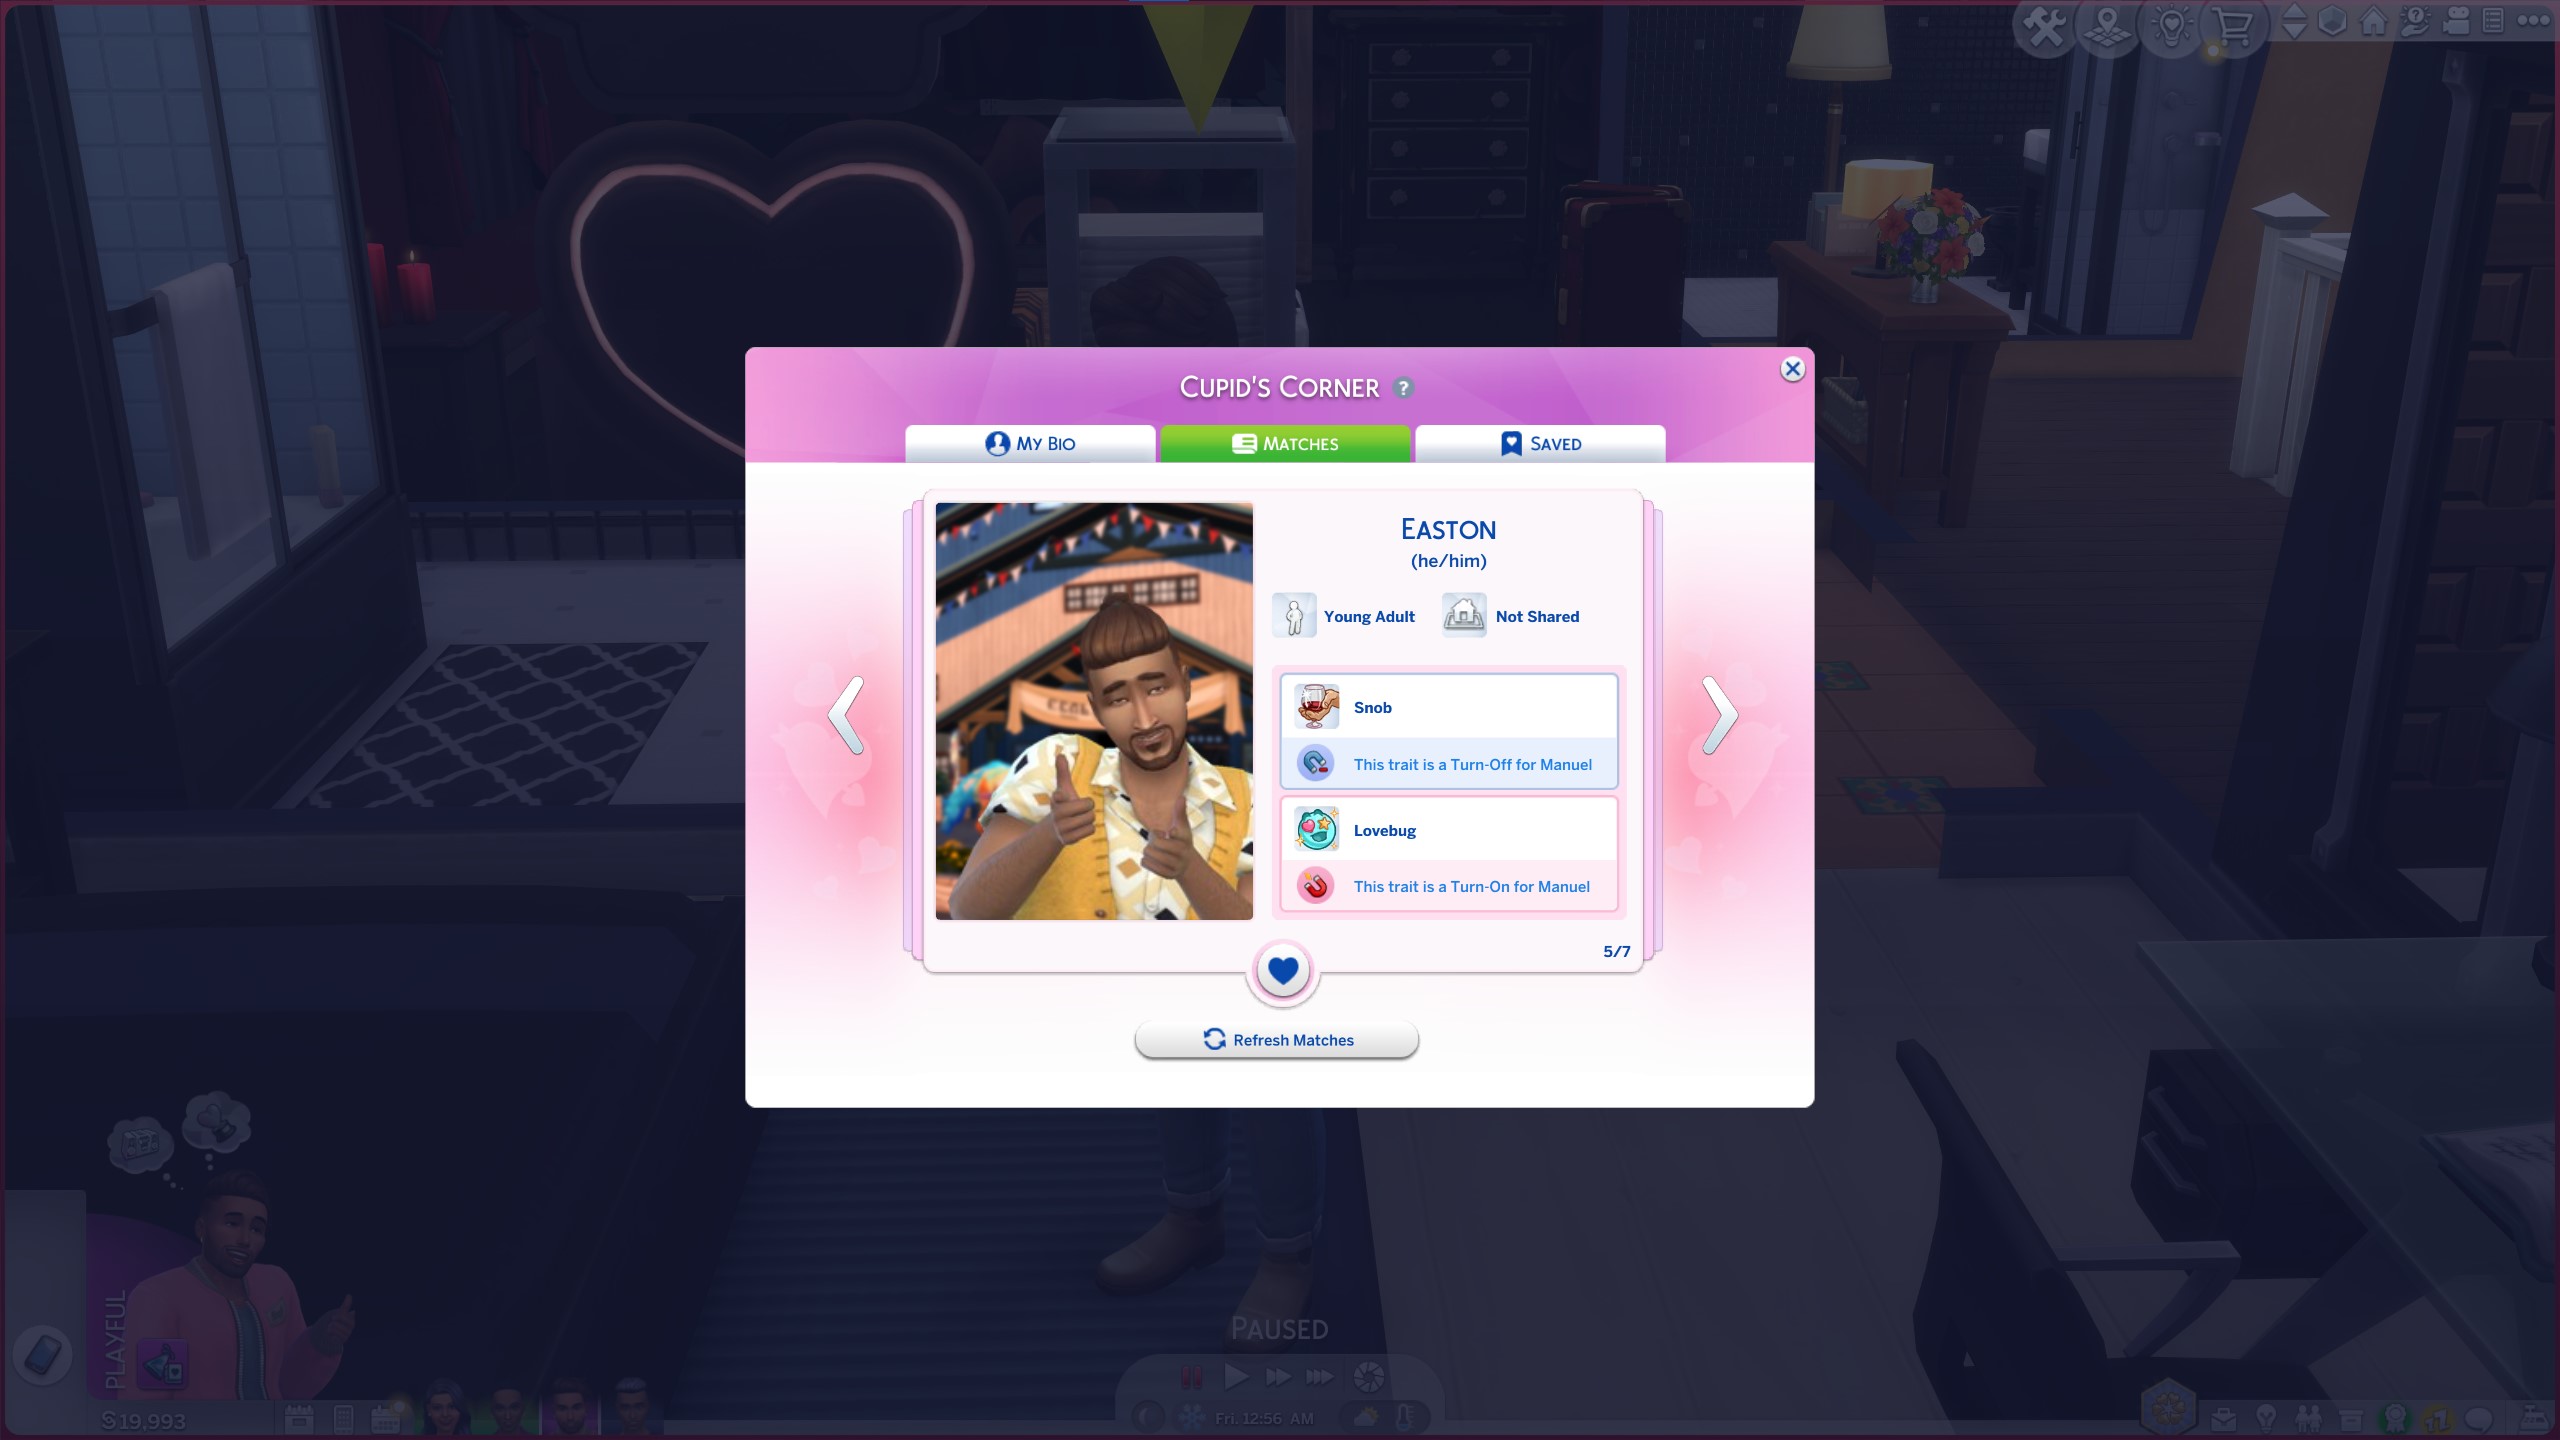 The Sims 4 Lovestruck - The Cupid's Corner screen shows a profile for a Sim who is a young adult with the traits Snob (turn-off for current Sim) and Lovebug (turn-on for current Sim)